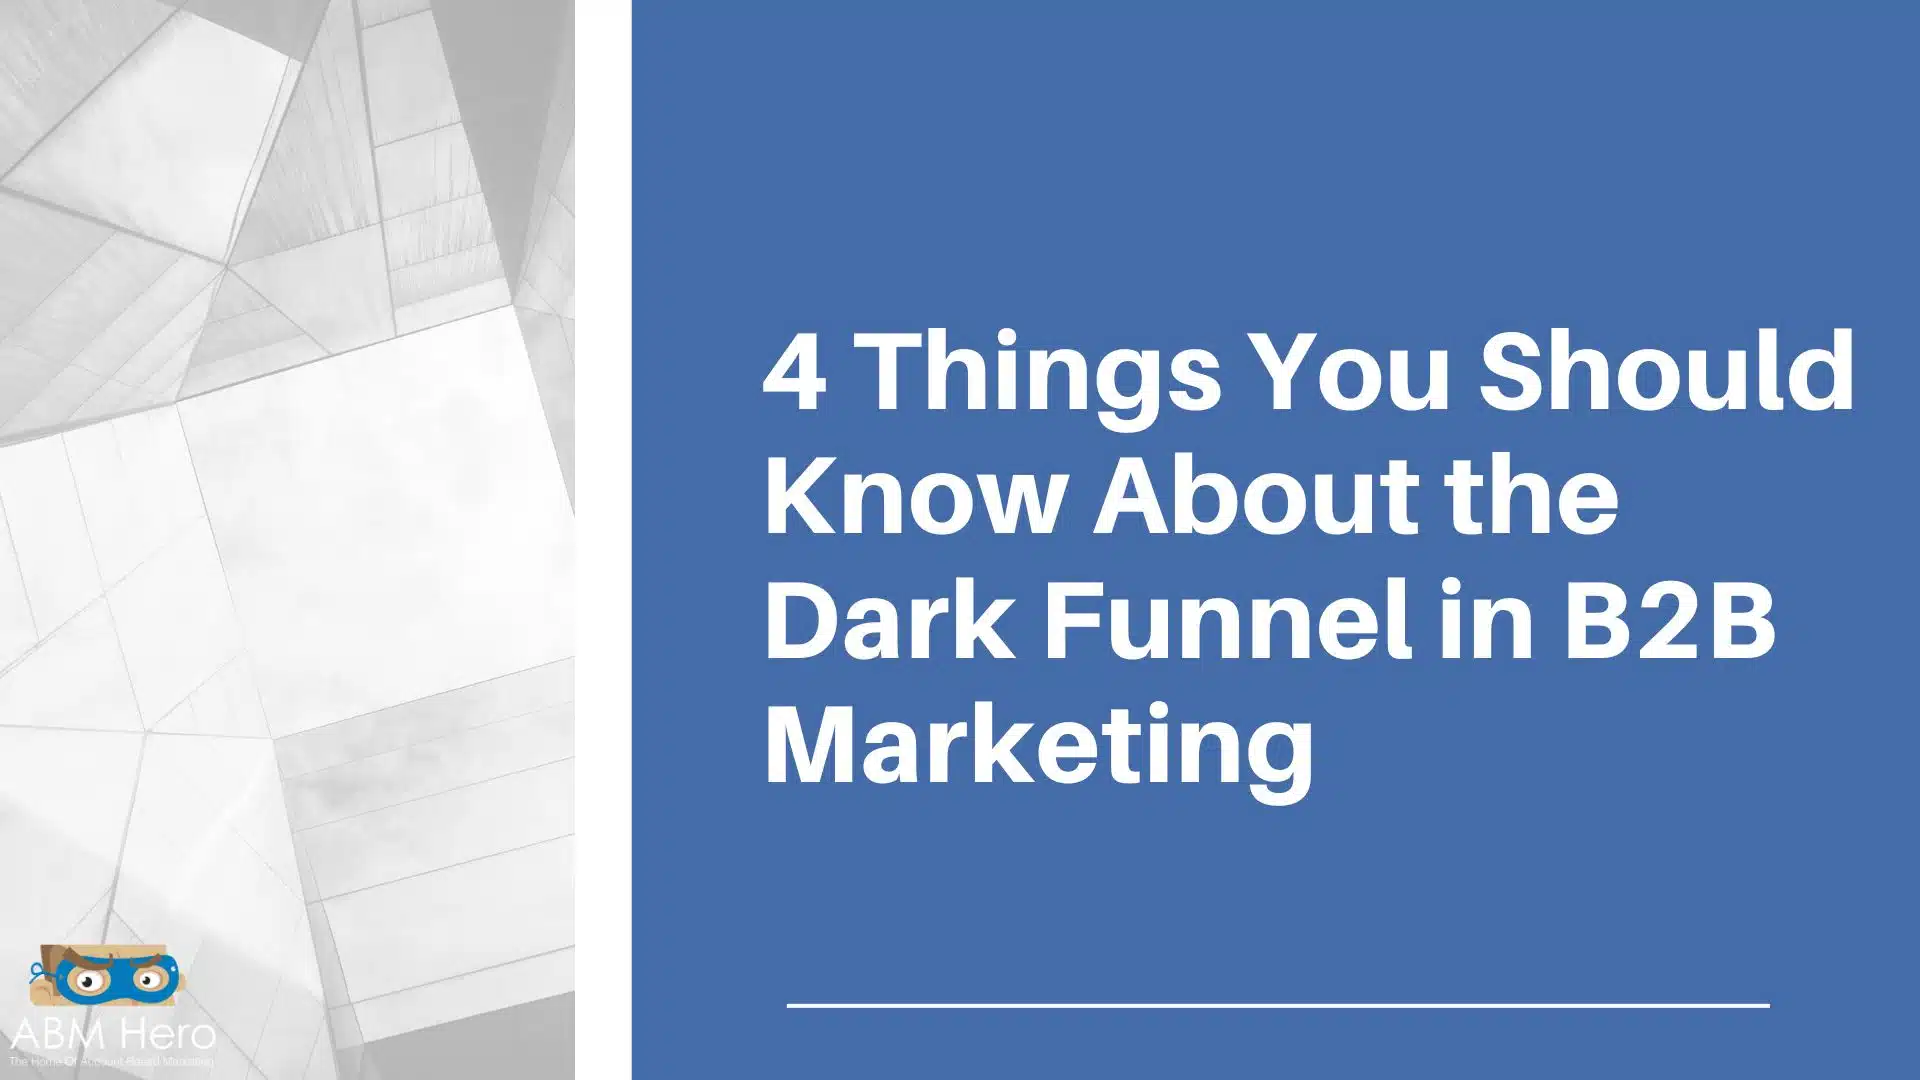 You are currently viewing 4 Things You Should Know About the Dark Funnel in B2B Marketing